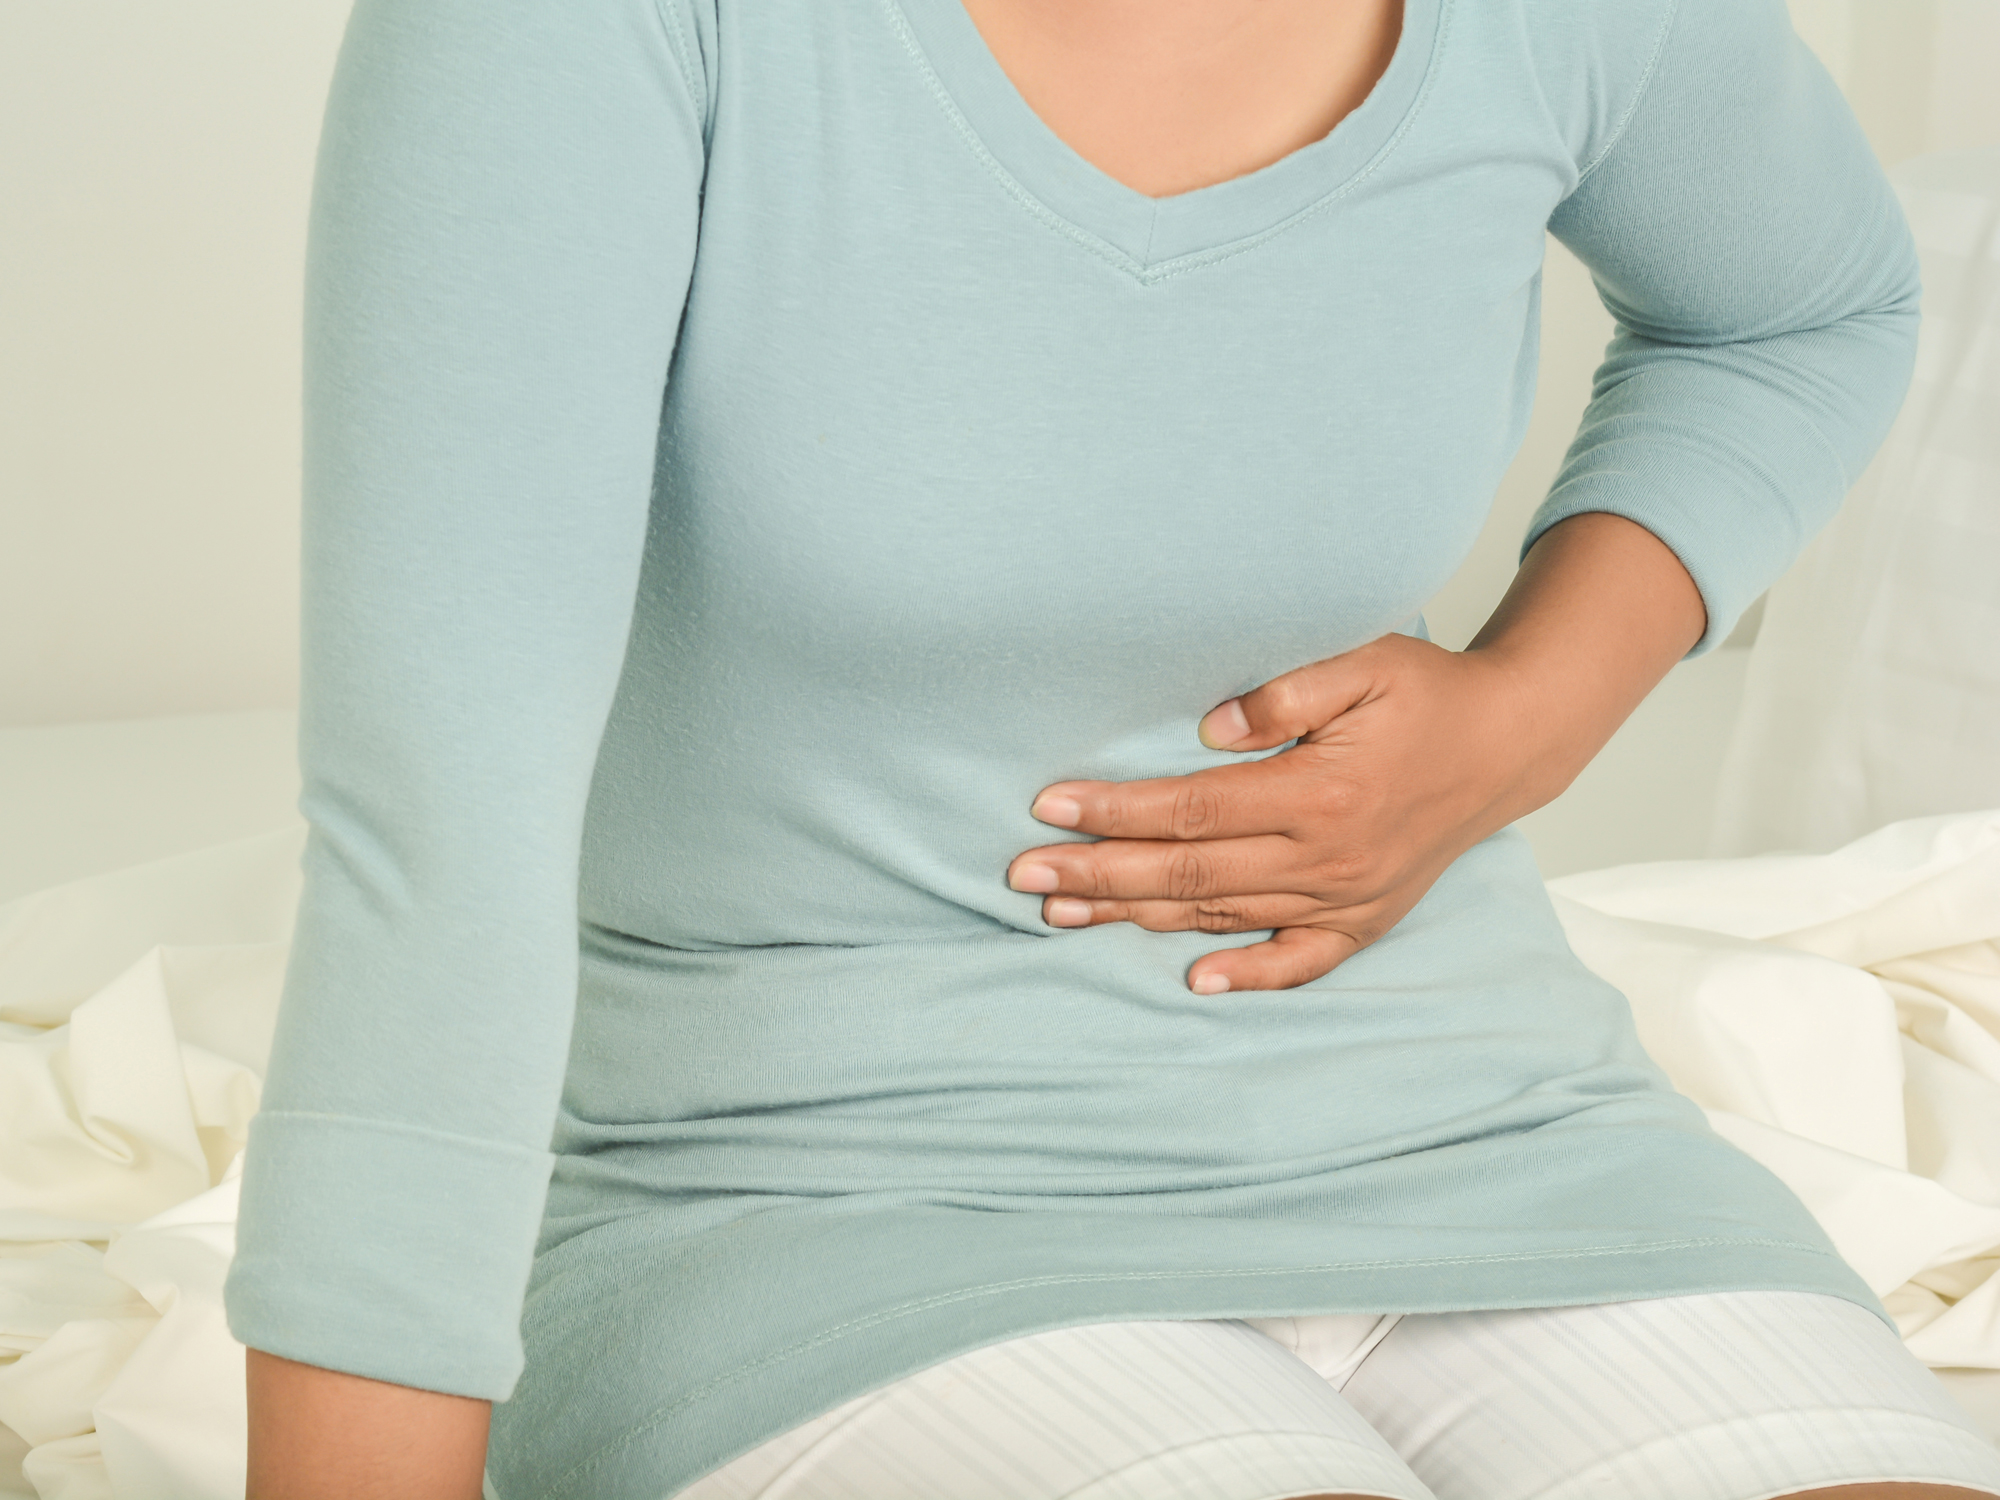 Gassy, bloated and tired? You’ve got a leaky gut